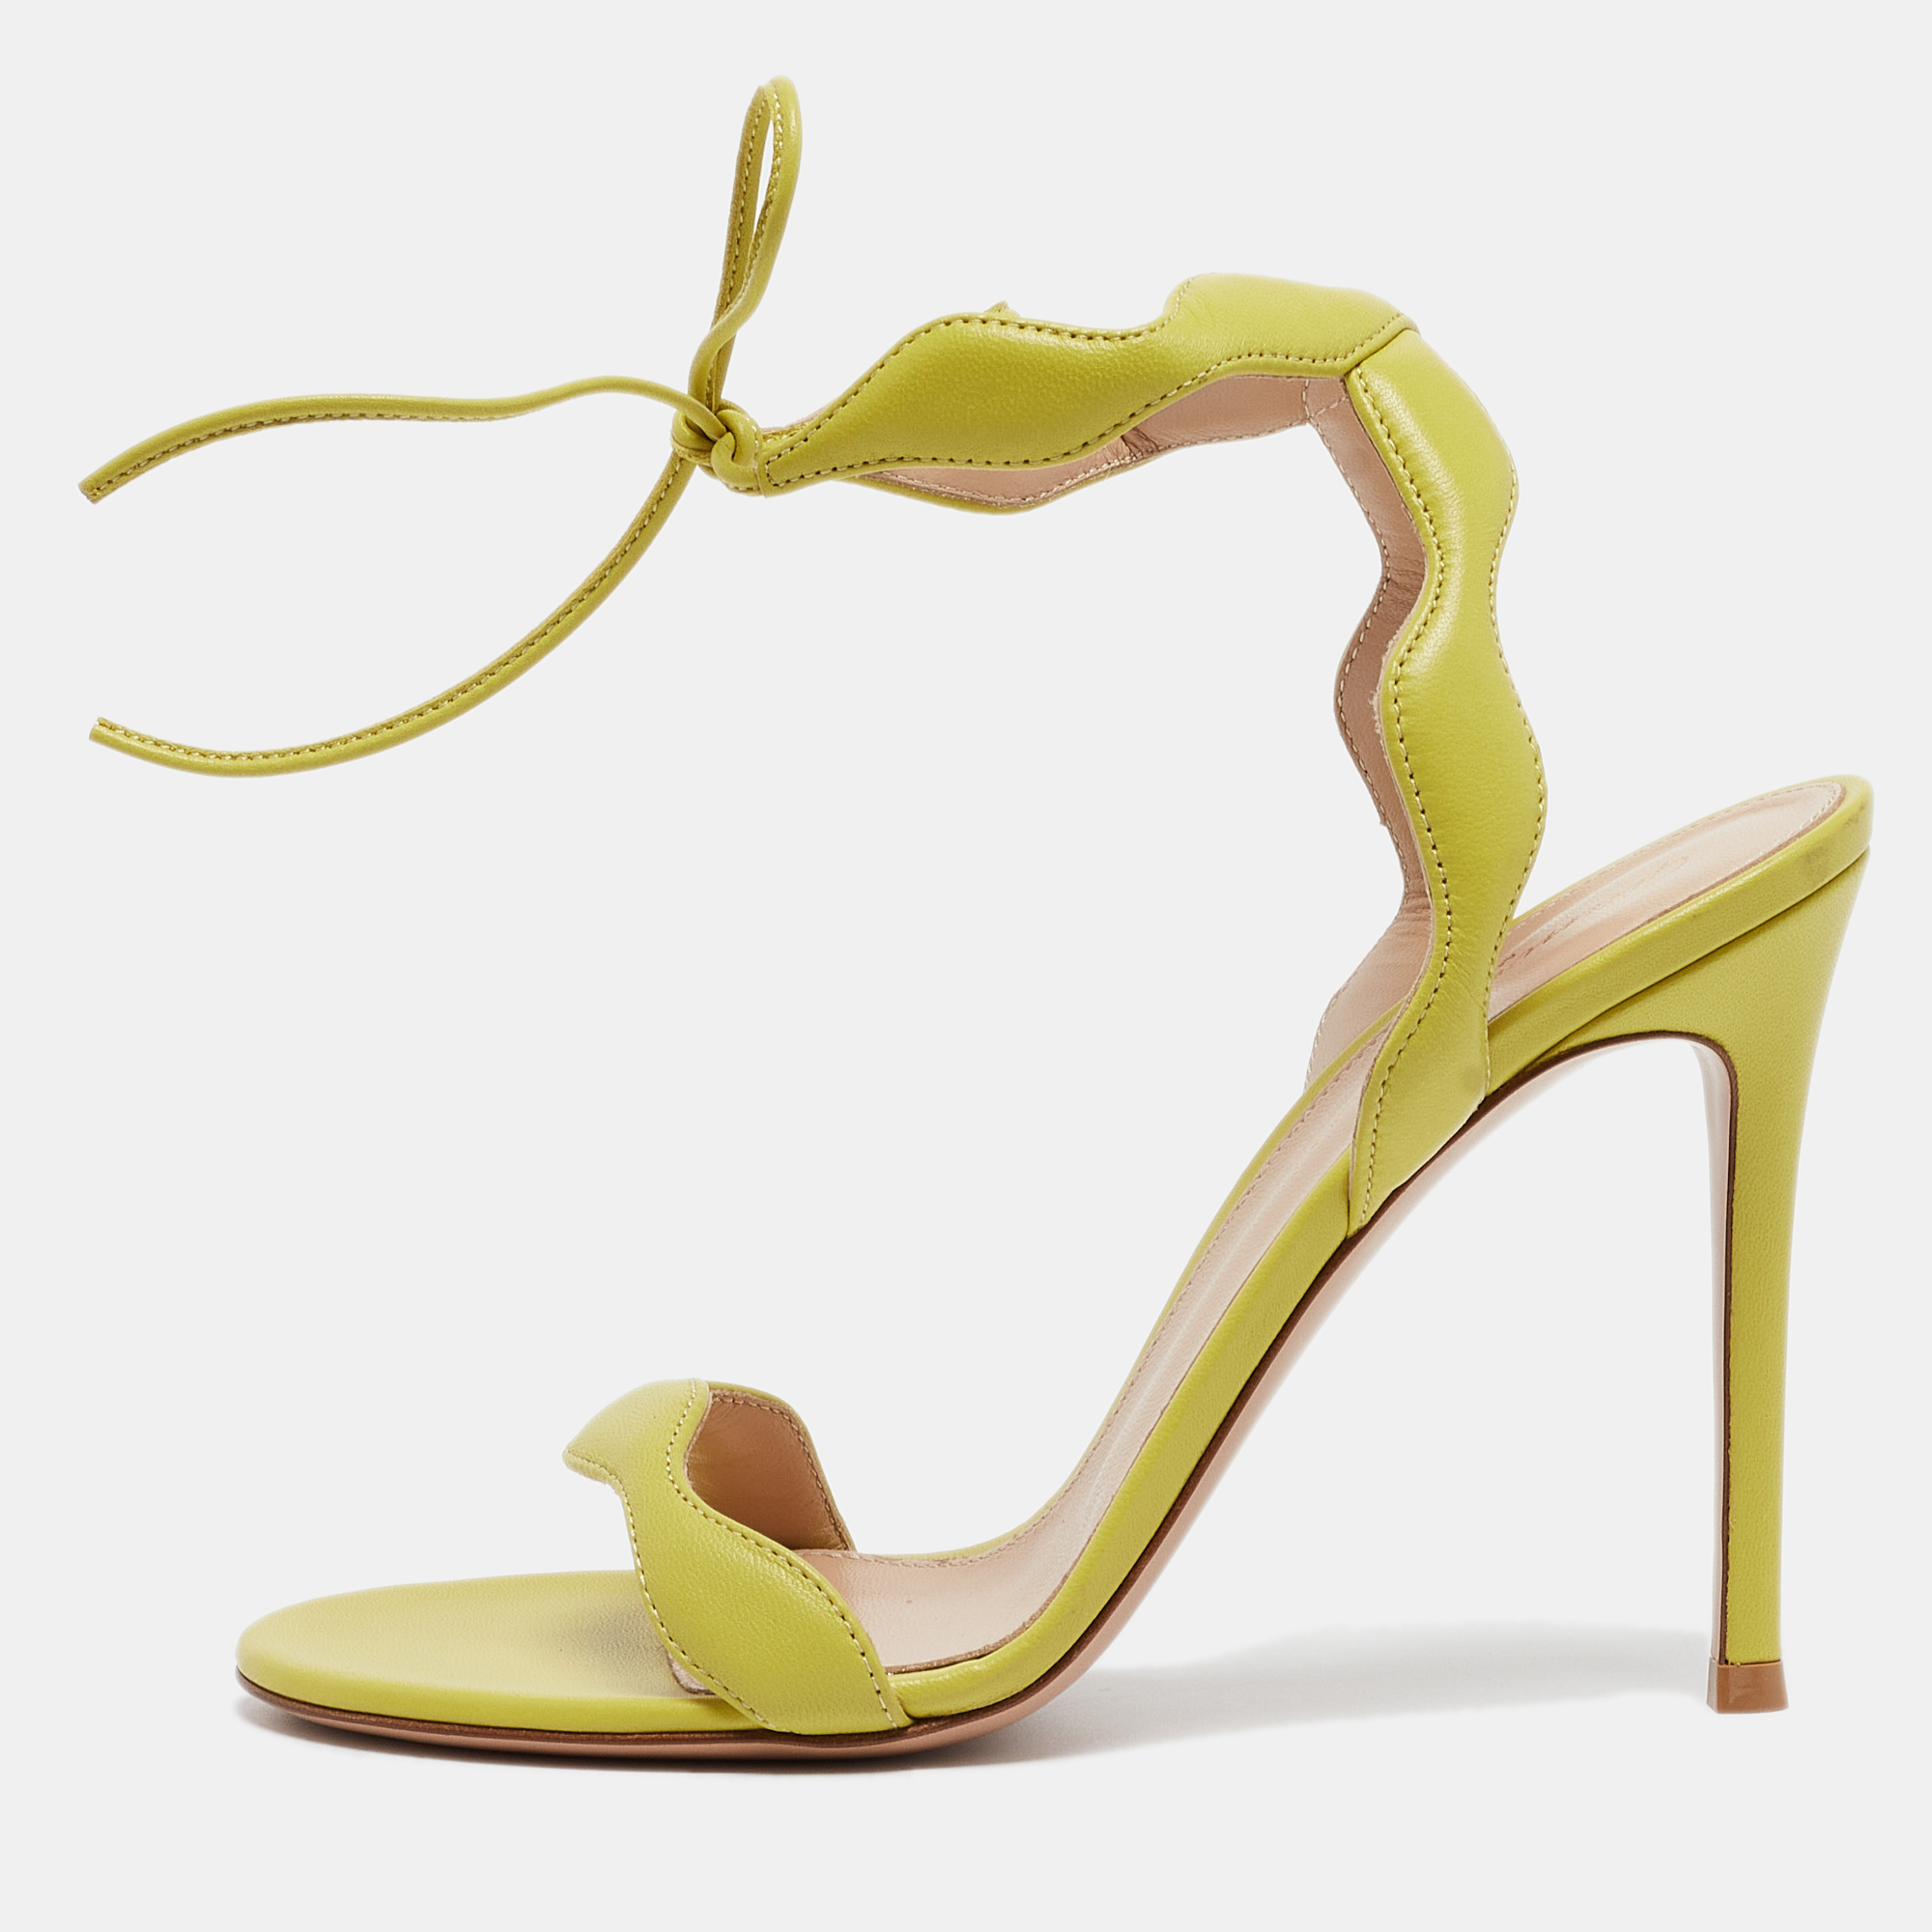 Pre-owned Gianvito Rossi Light Green Leather Wavy Ankle Tie Sandals Size 37